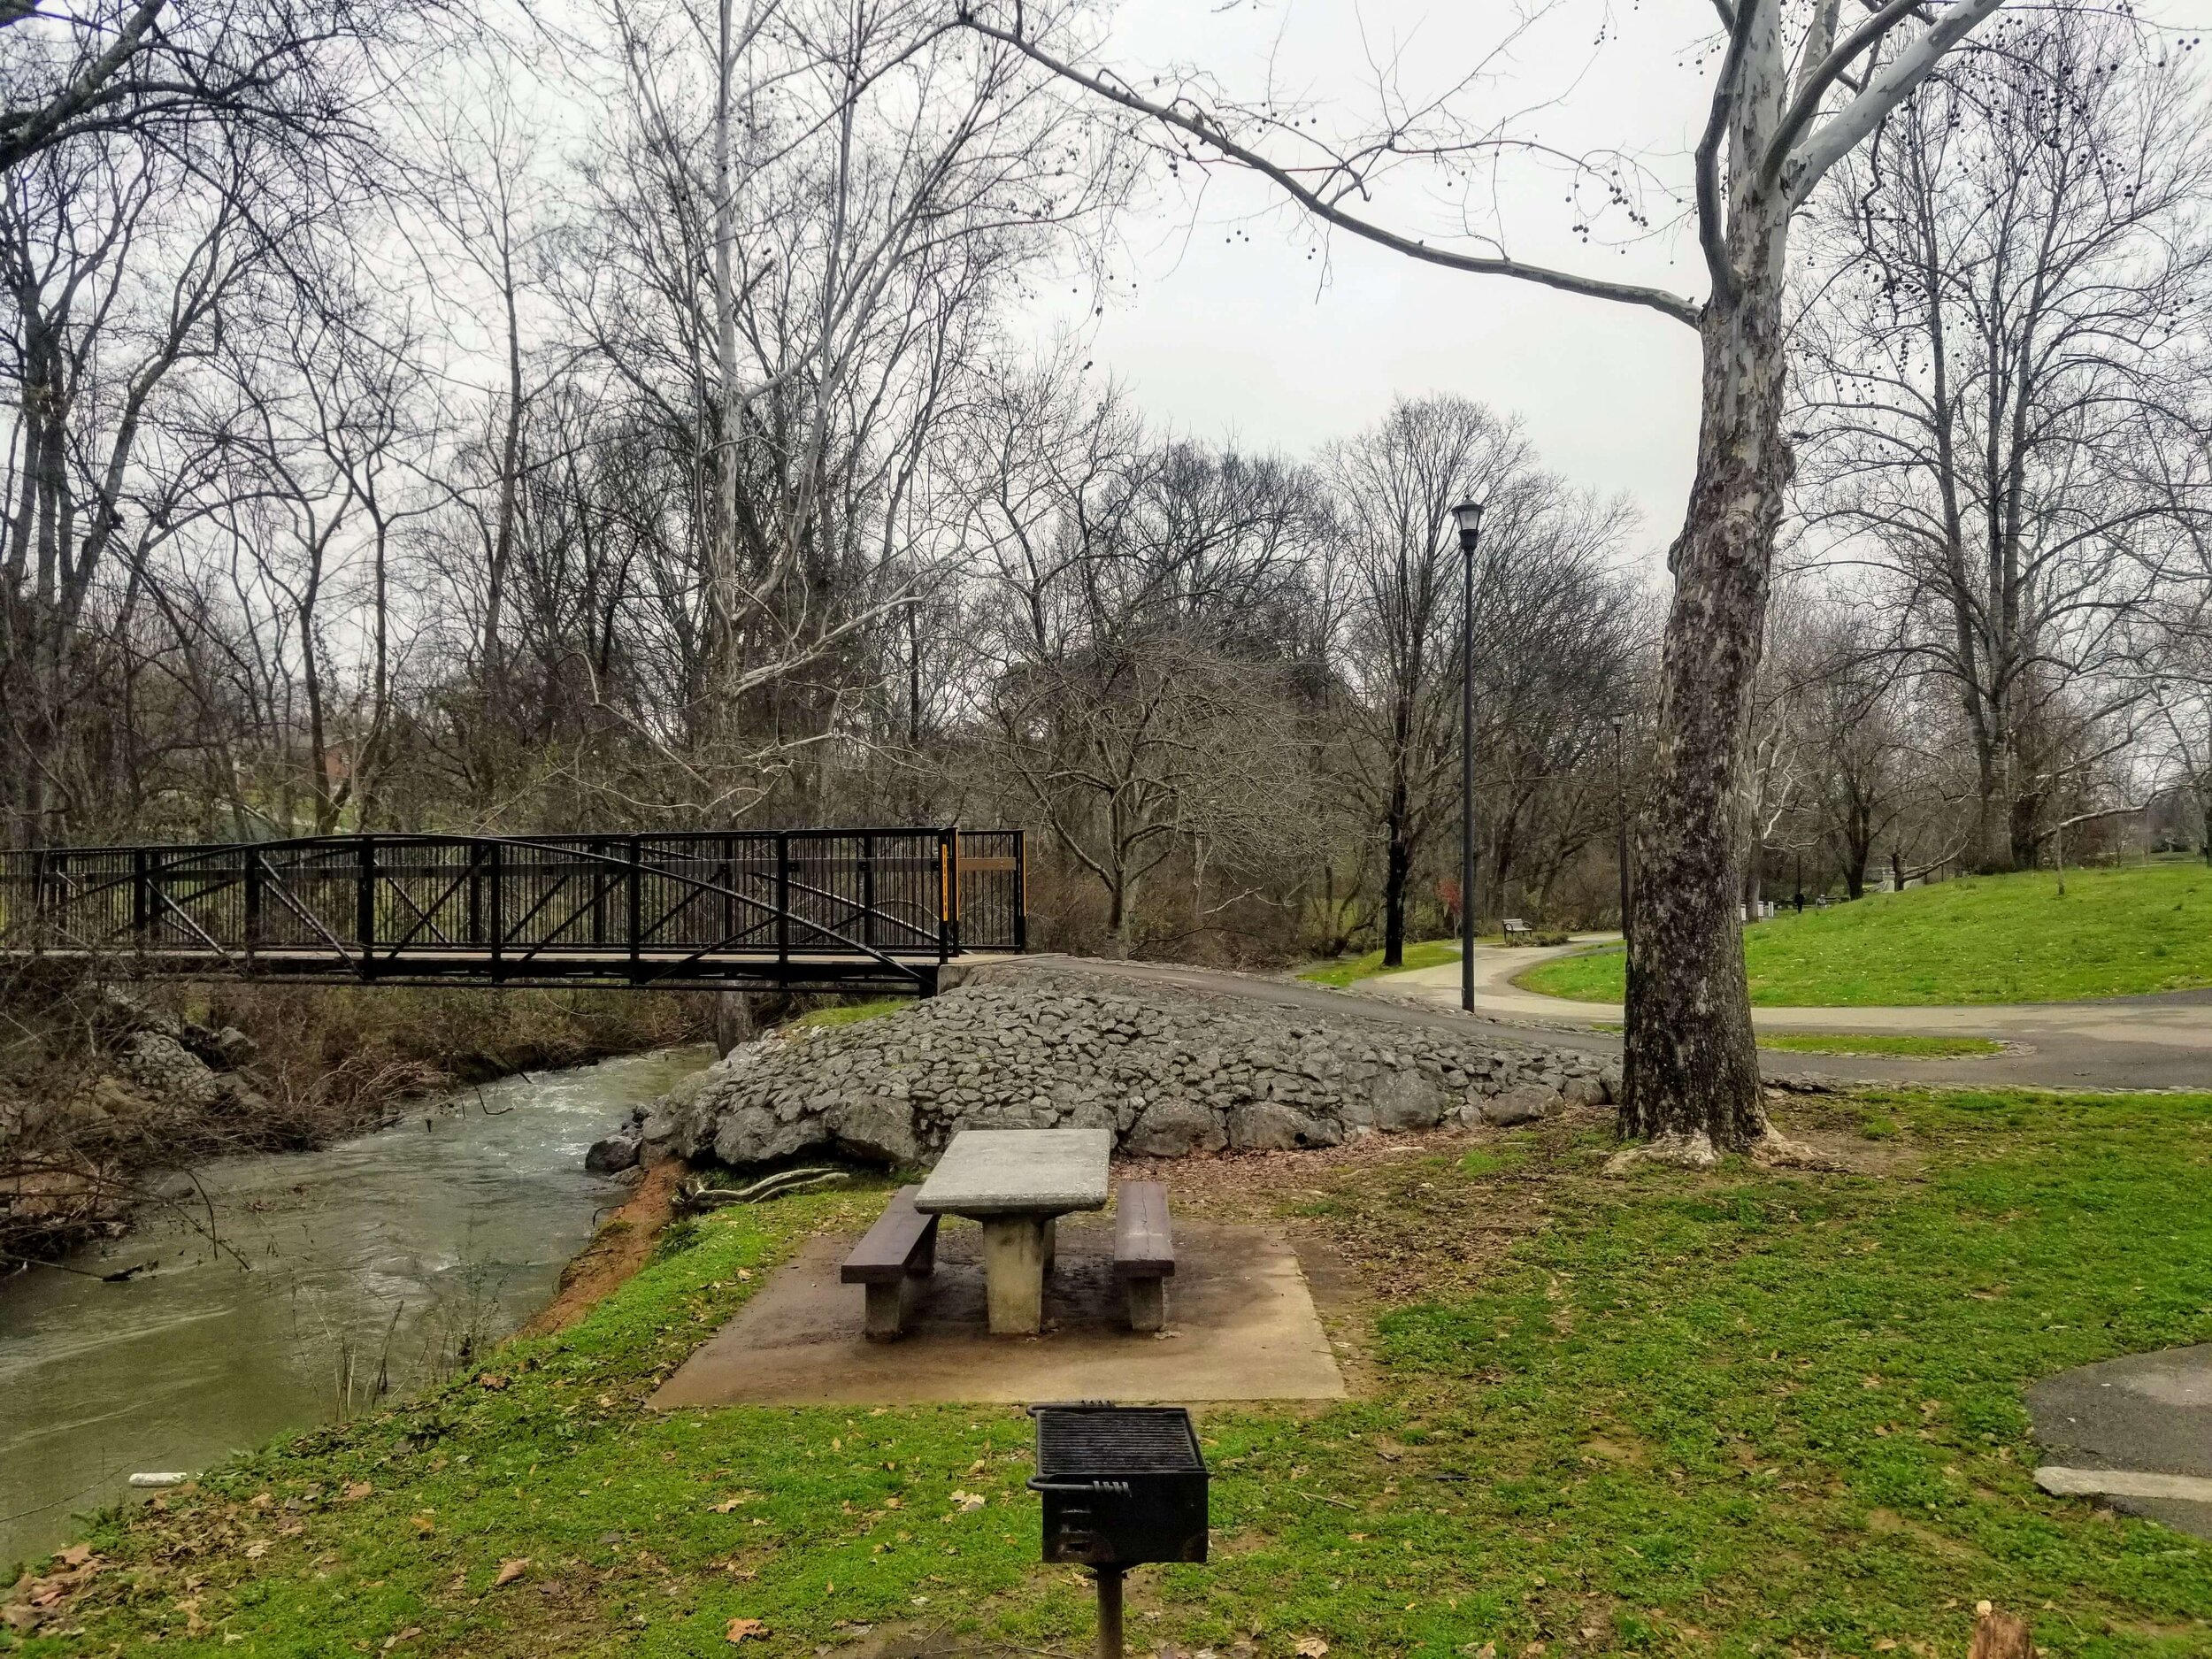 One of the picnic tables by Pistol Creek in Sandy Springs Park